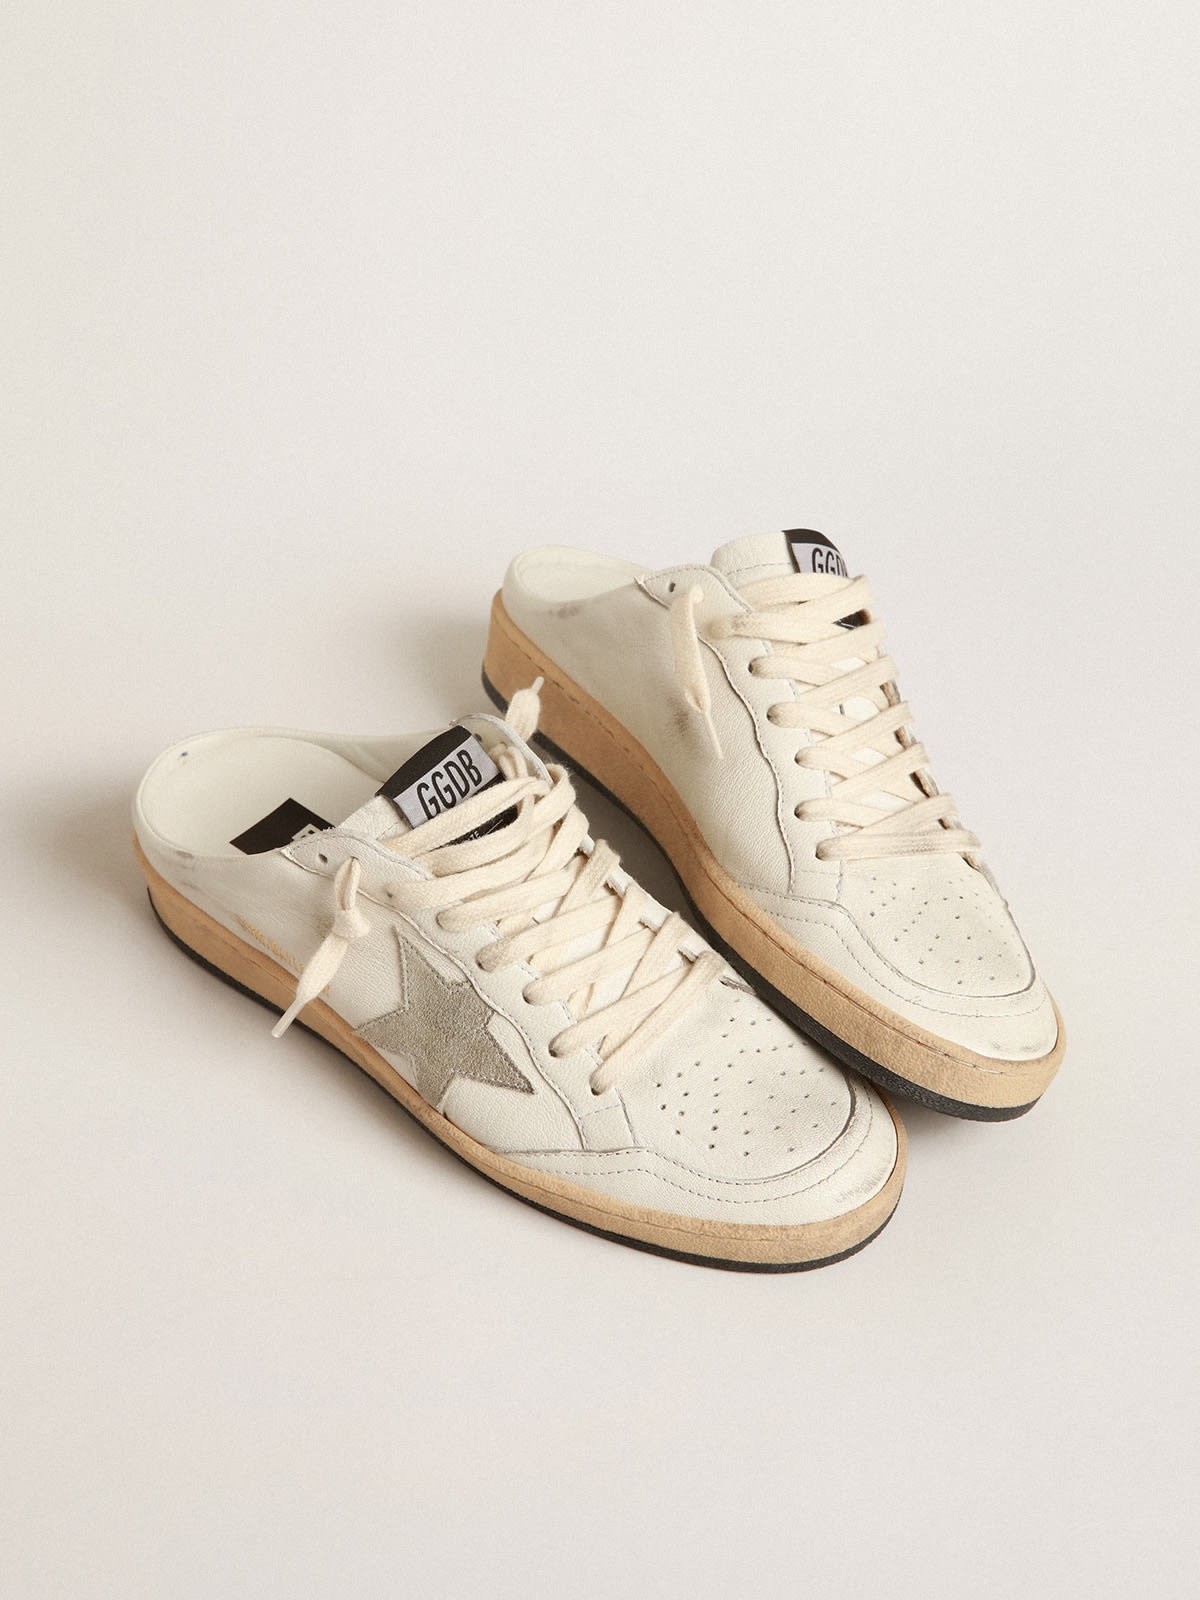 Ball Star Sabots in nappa leather with ice-gray suede star - 2